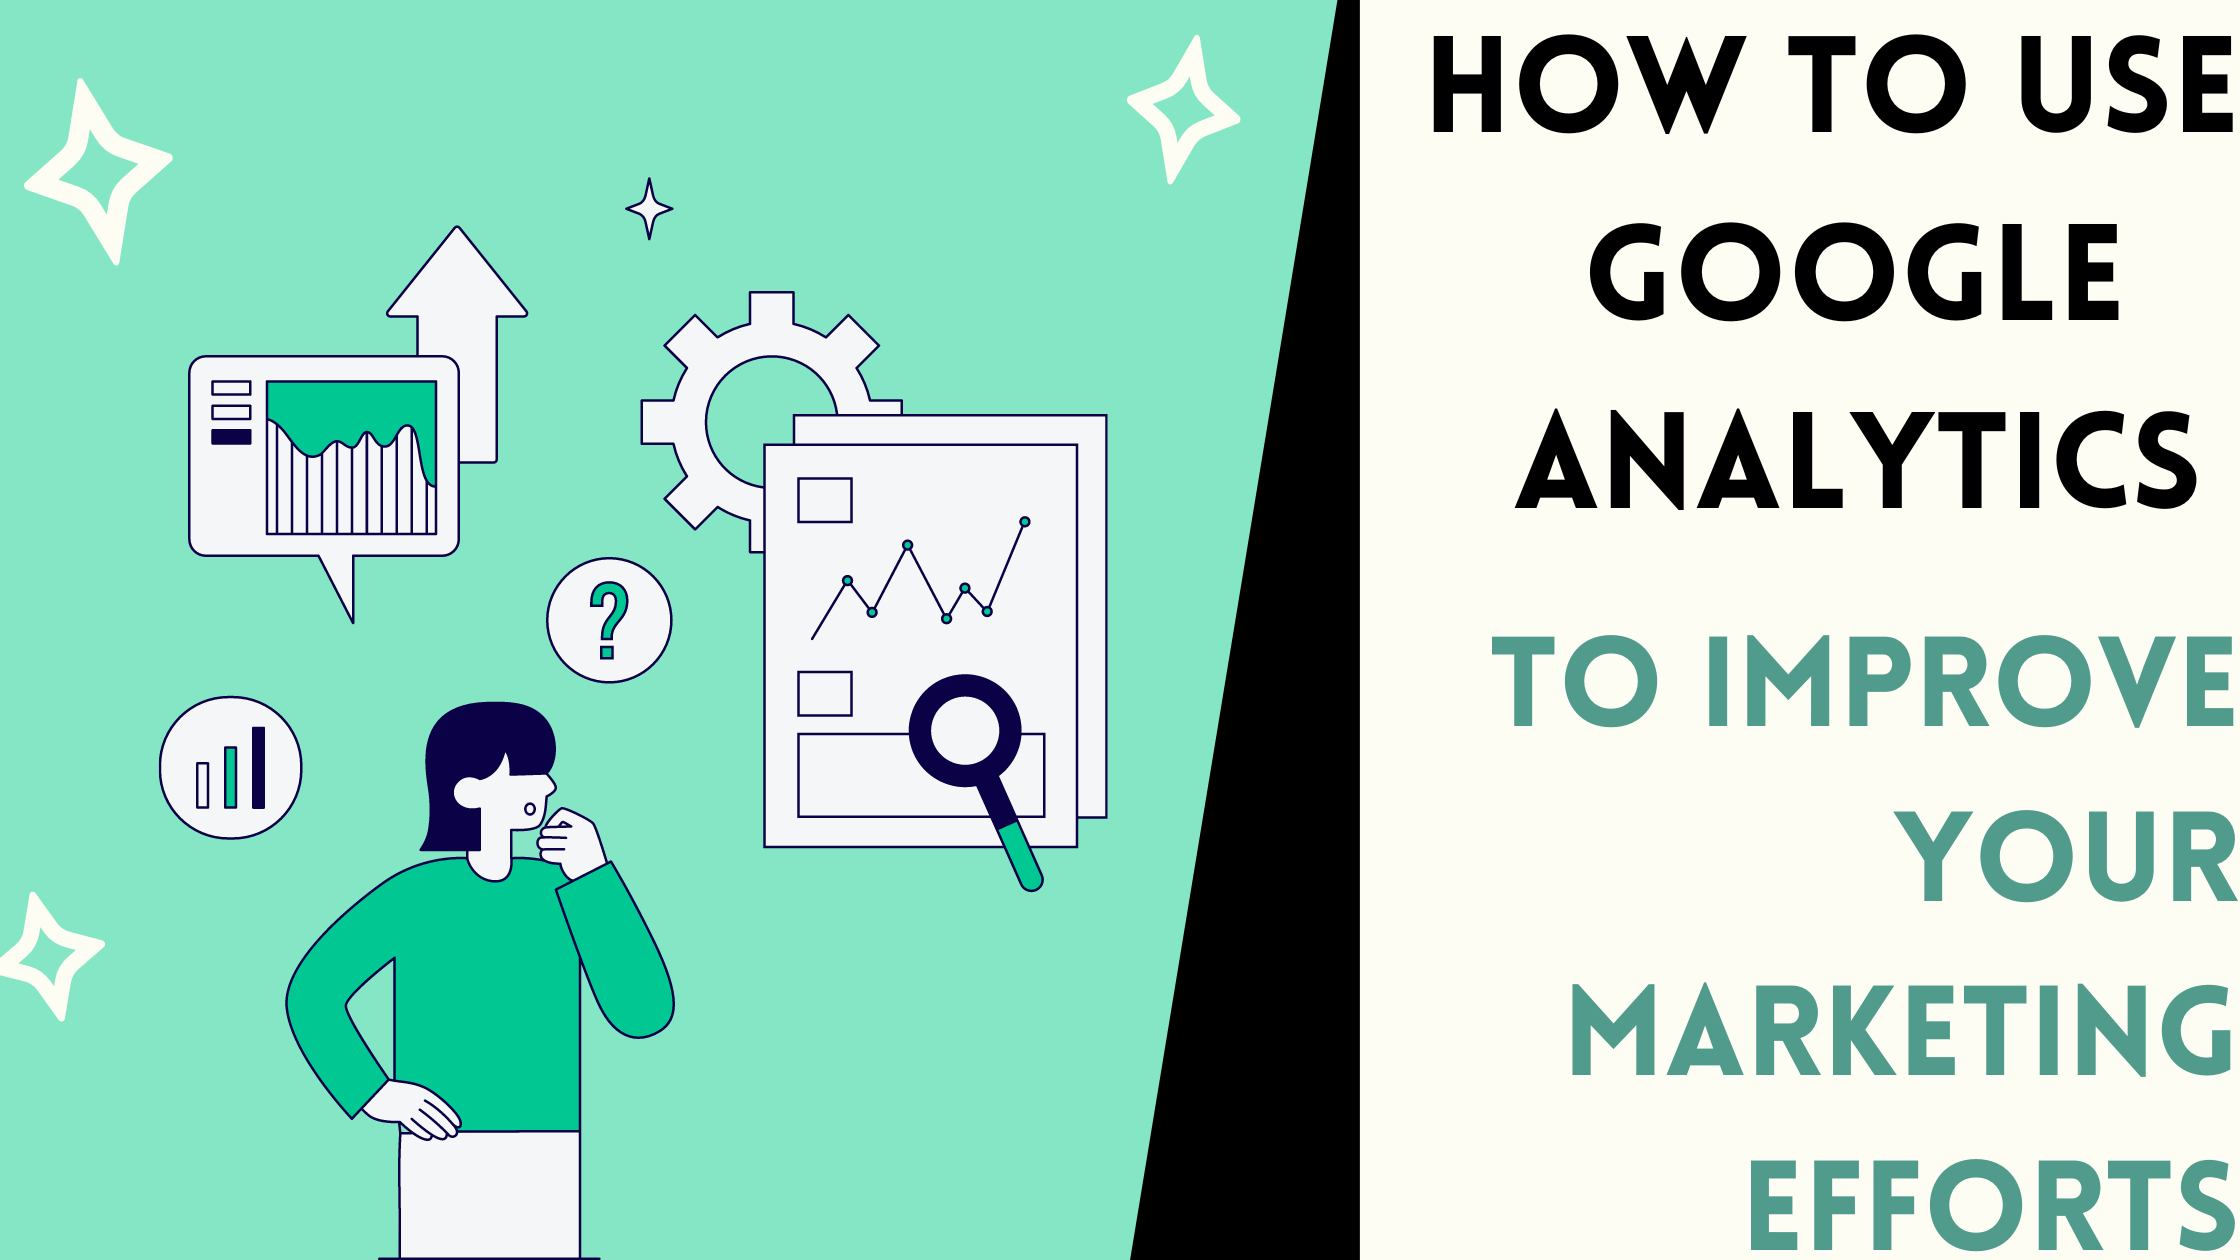 How to use Google analytics to improve your Marketing Efforts